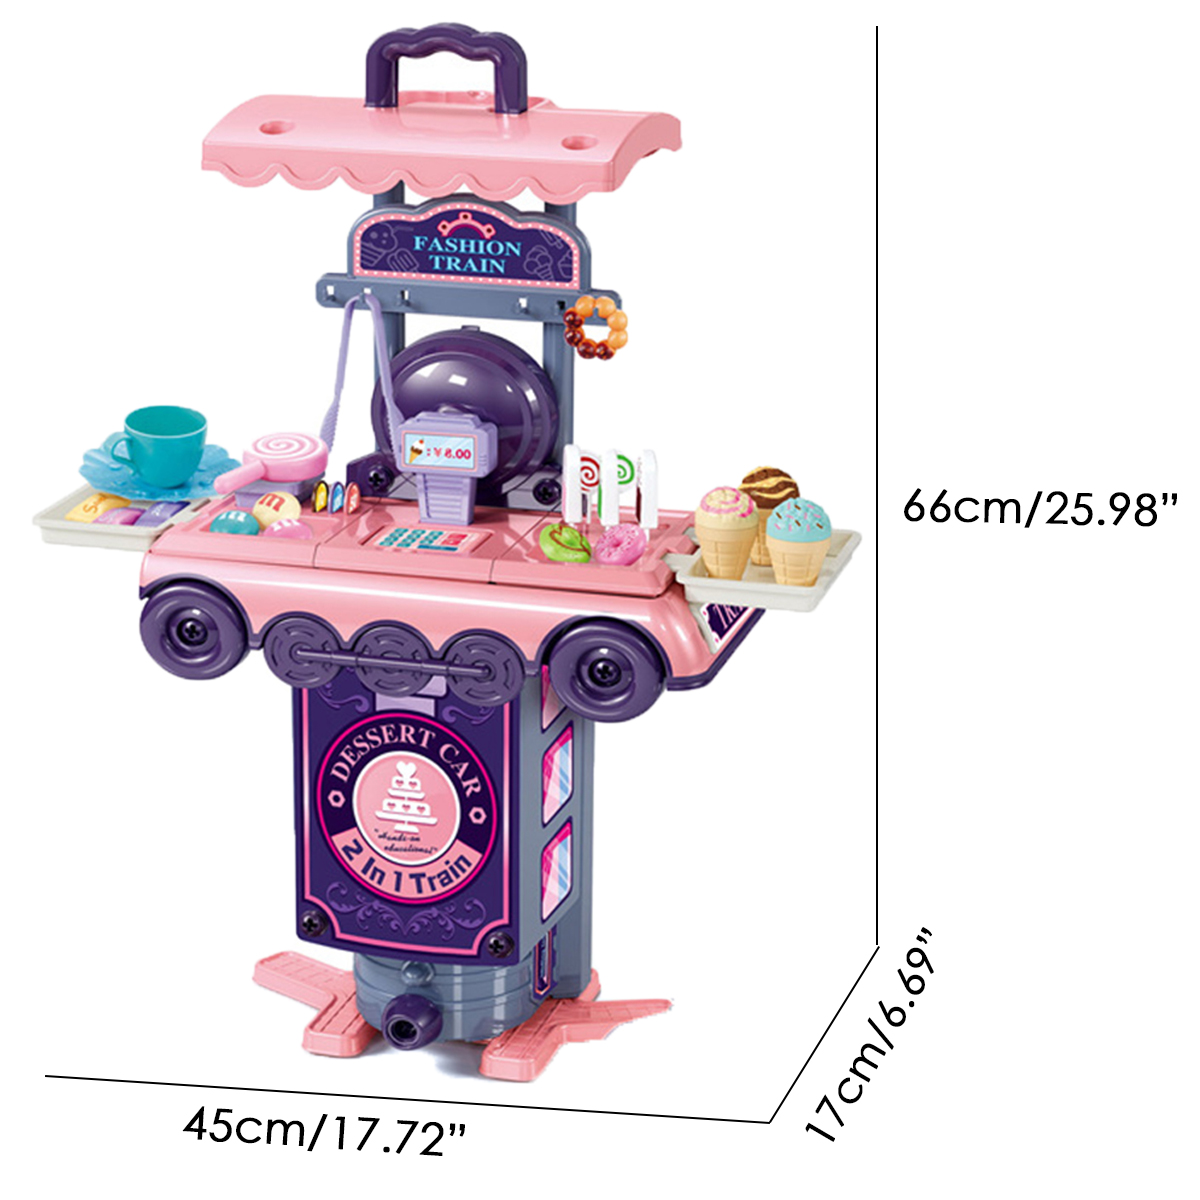 2-IN-1-Multi-style-Kitchen-Cooking-Play-and-Portable-Small-Train-Learning-Set-Toys-for-Kids-Gift-1673927-9